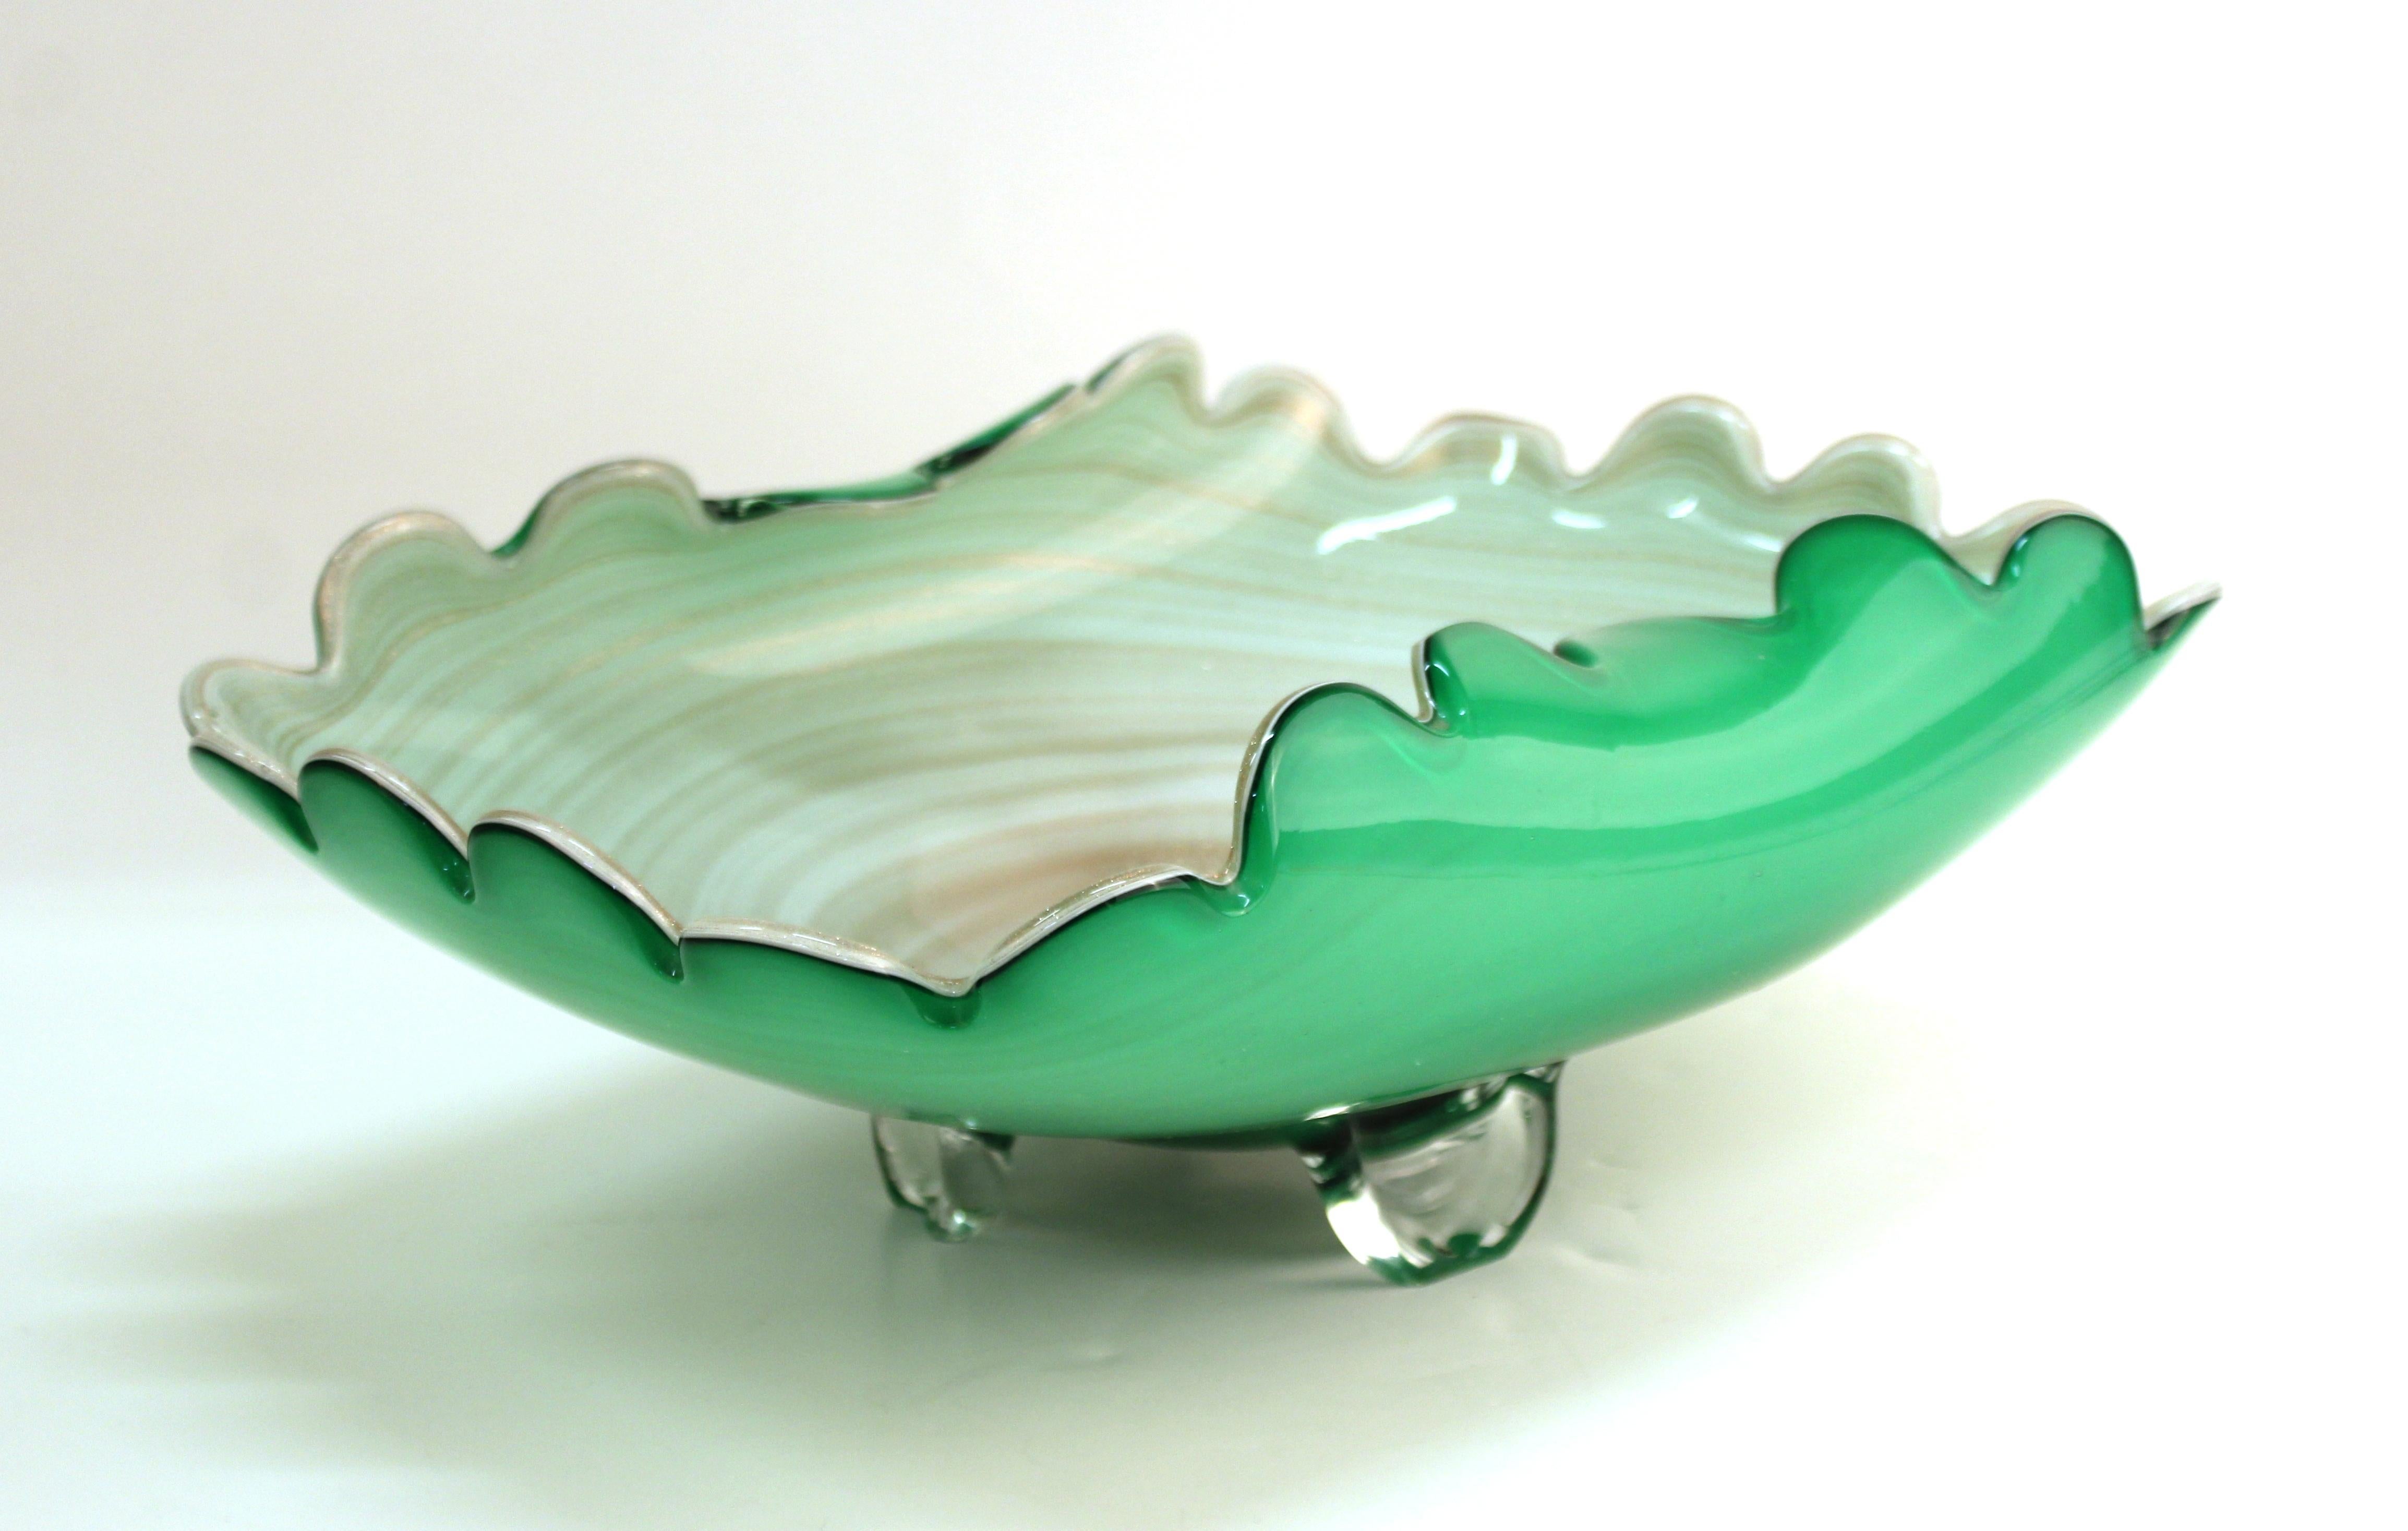 Italian modern art glass swirl bowl in green and cream with gold dust. The piece was made in Murano and features ruffled edges. In great vintage condition, with age-appropriate wear and a minor chip to one of the legs.